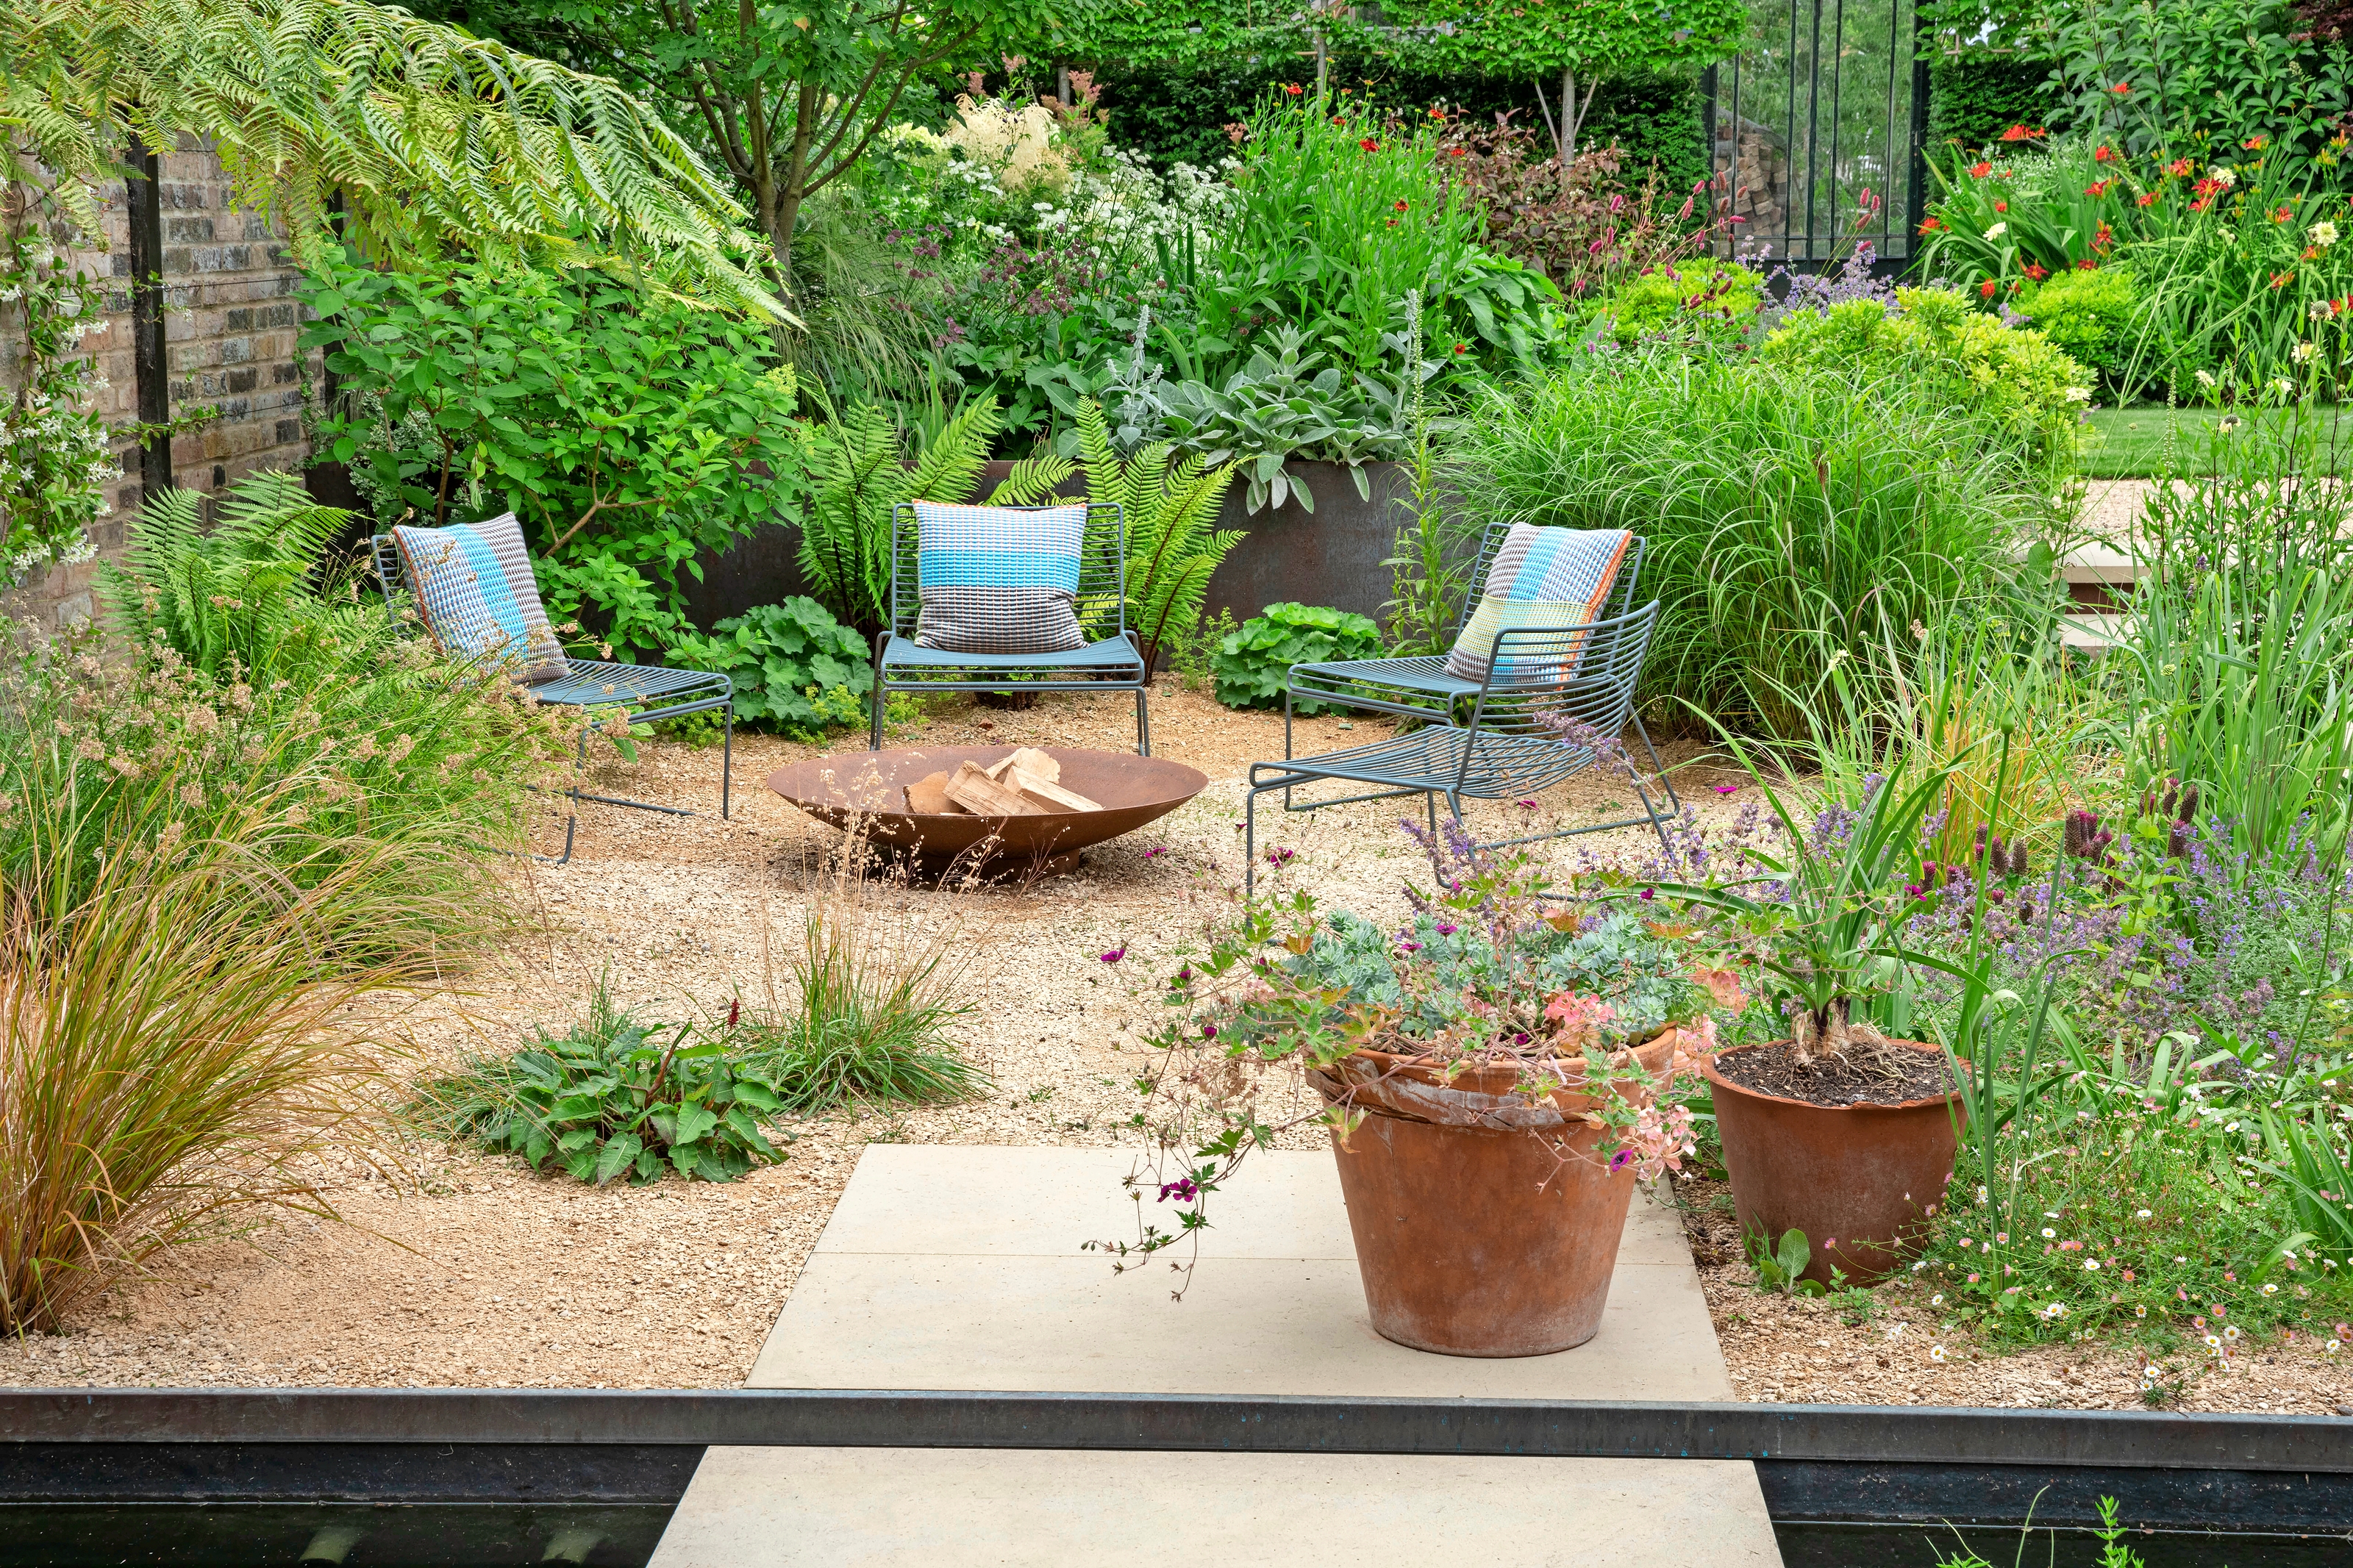 Joe Swift: our expert’s guide to laying garden surfaces